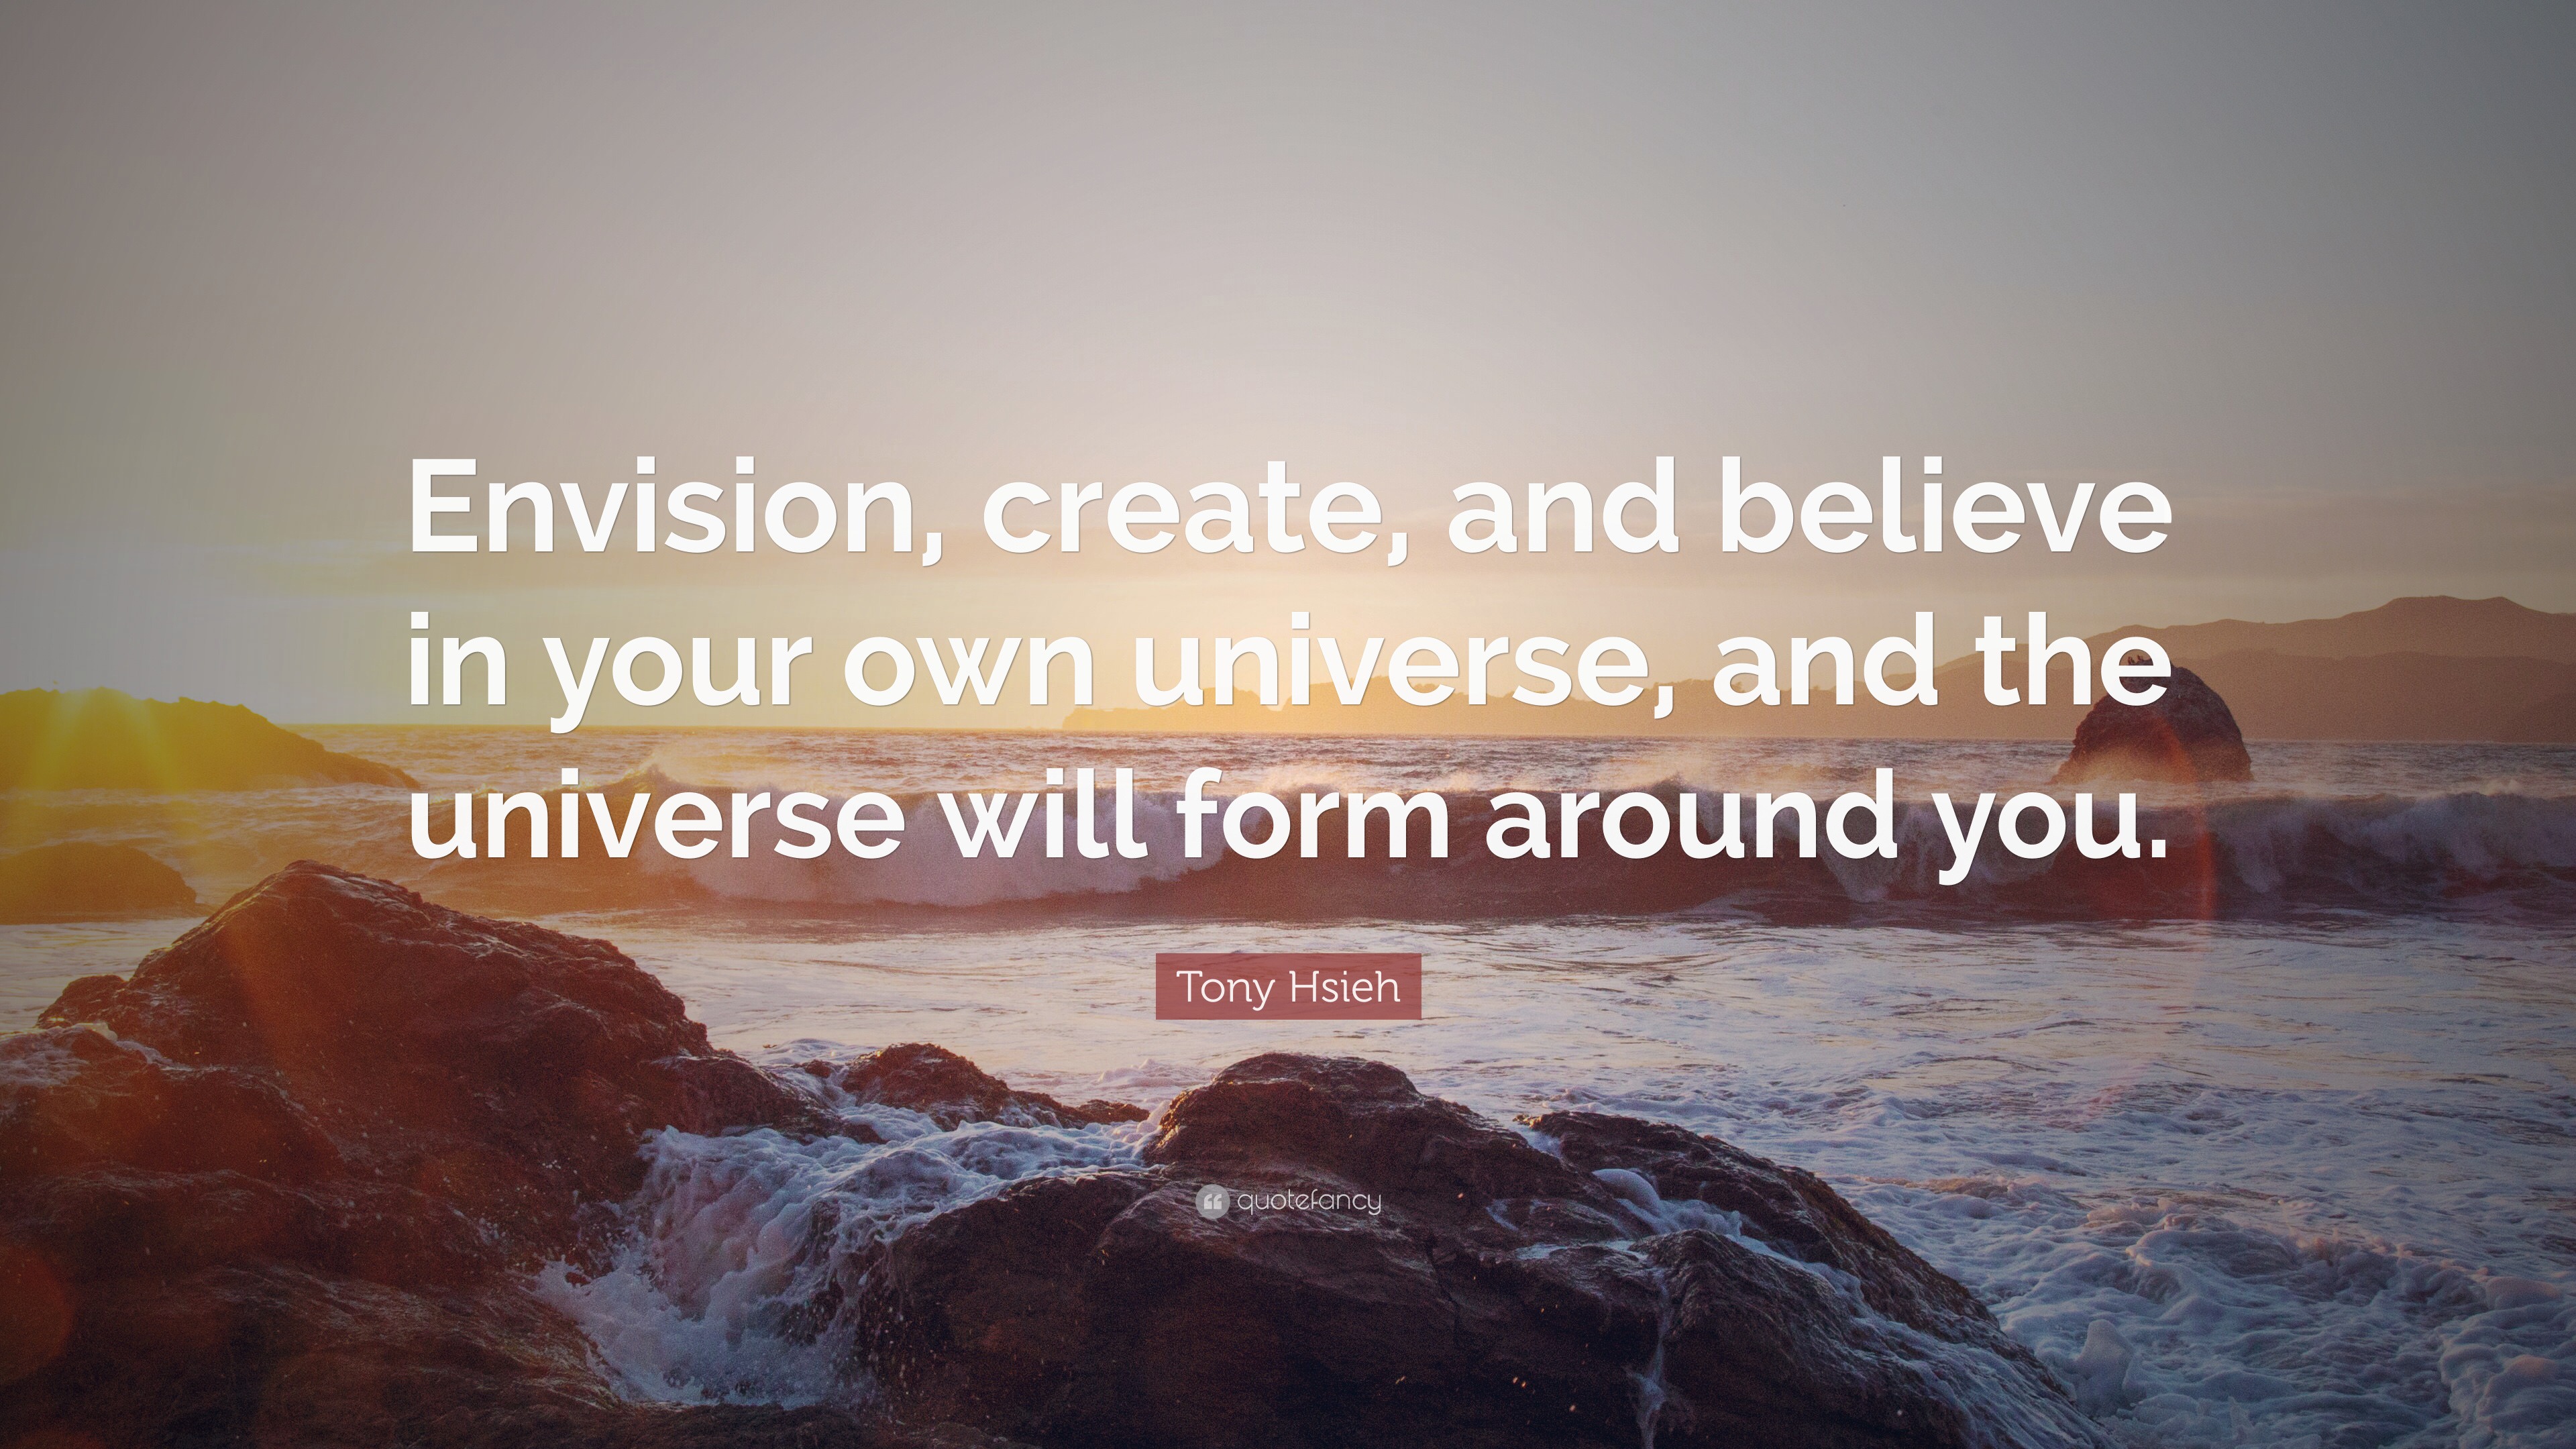 Tony Hsieh Quote: “Envision, create, and believe in your own universe ...